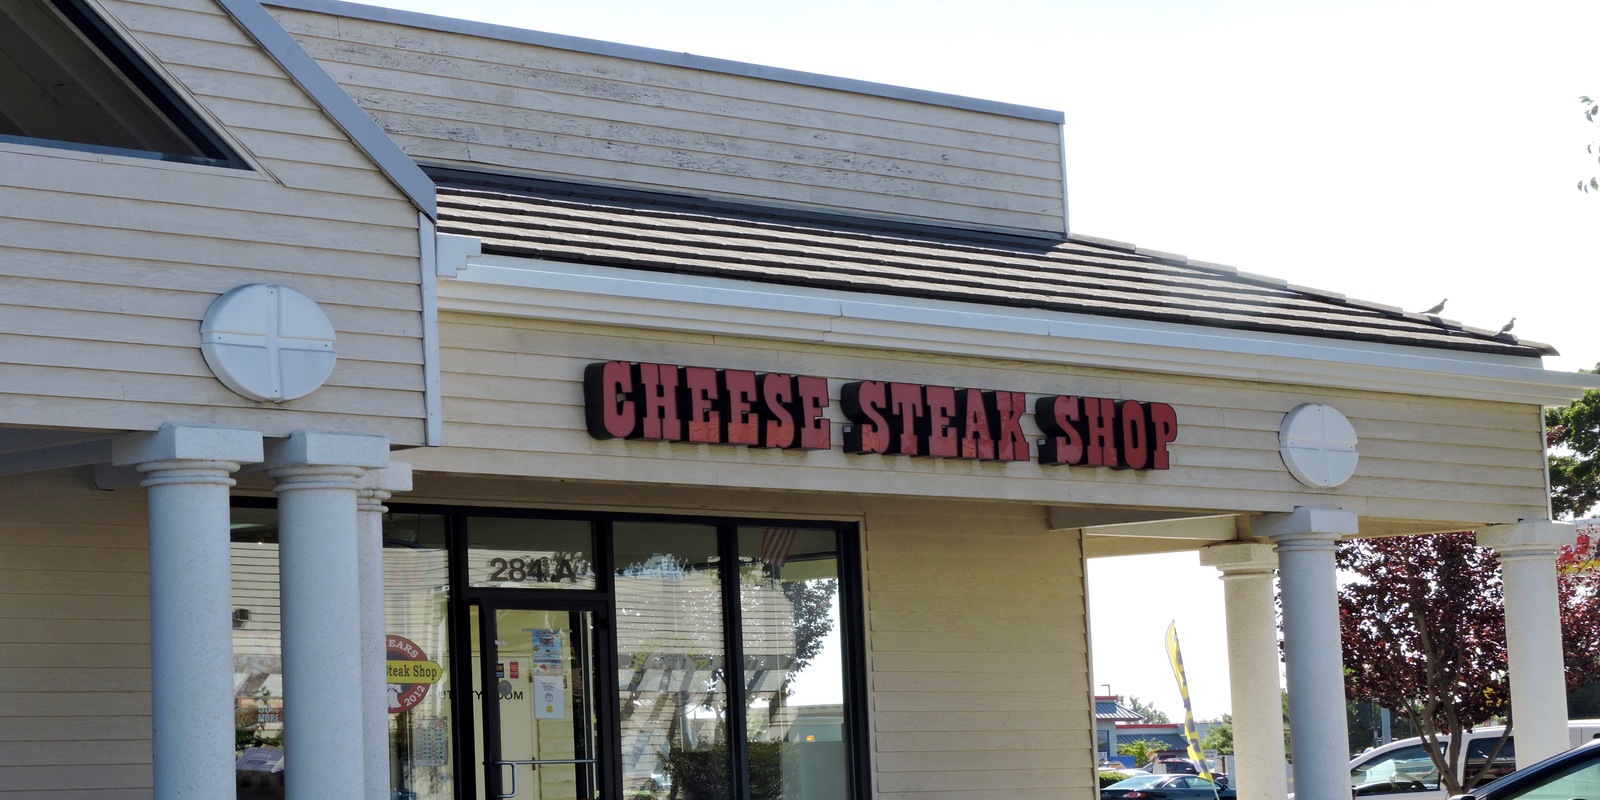 Image of Cheese Steak Shop